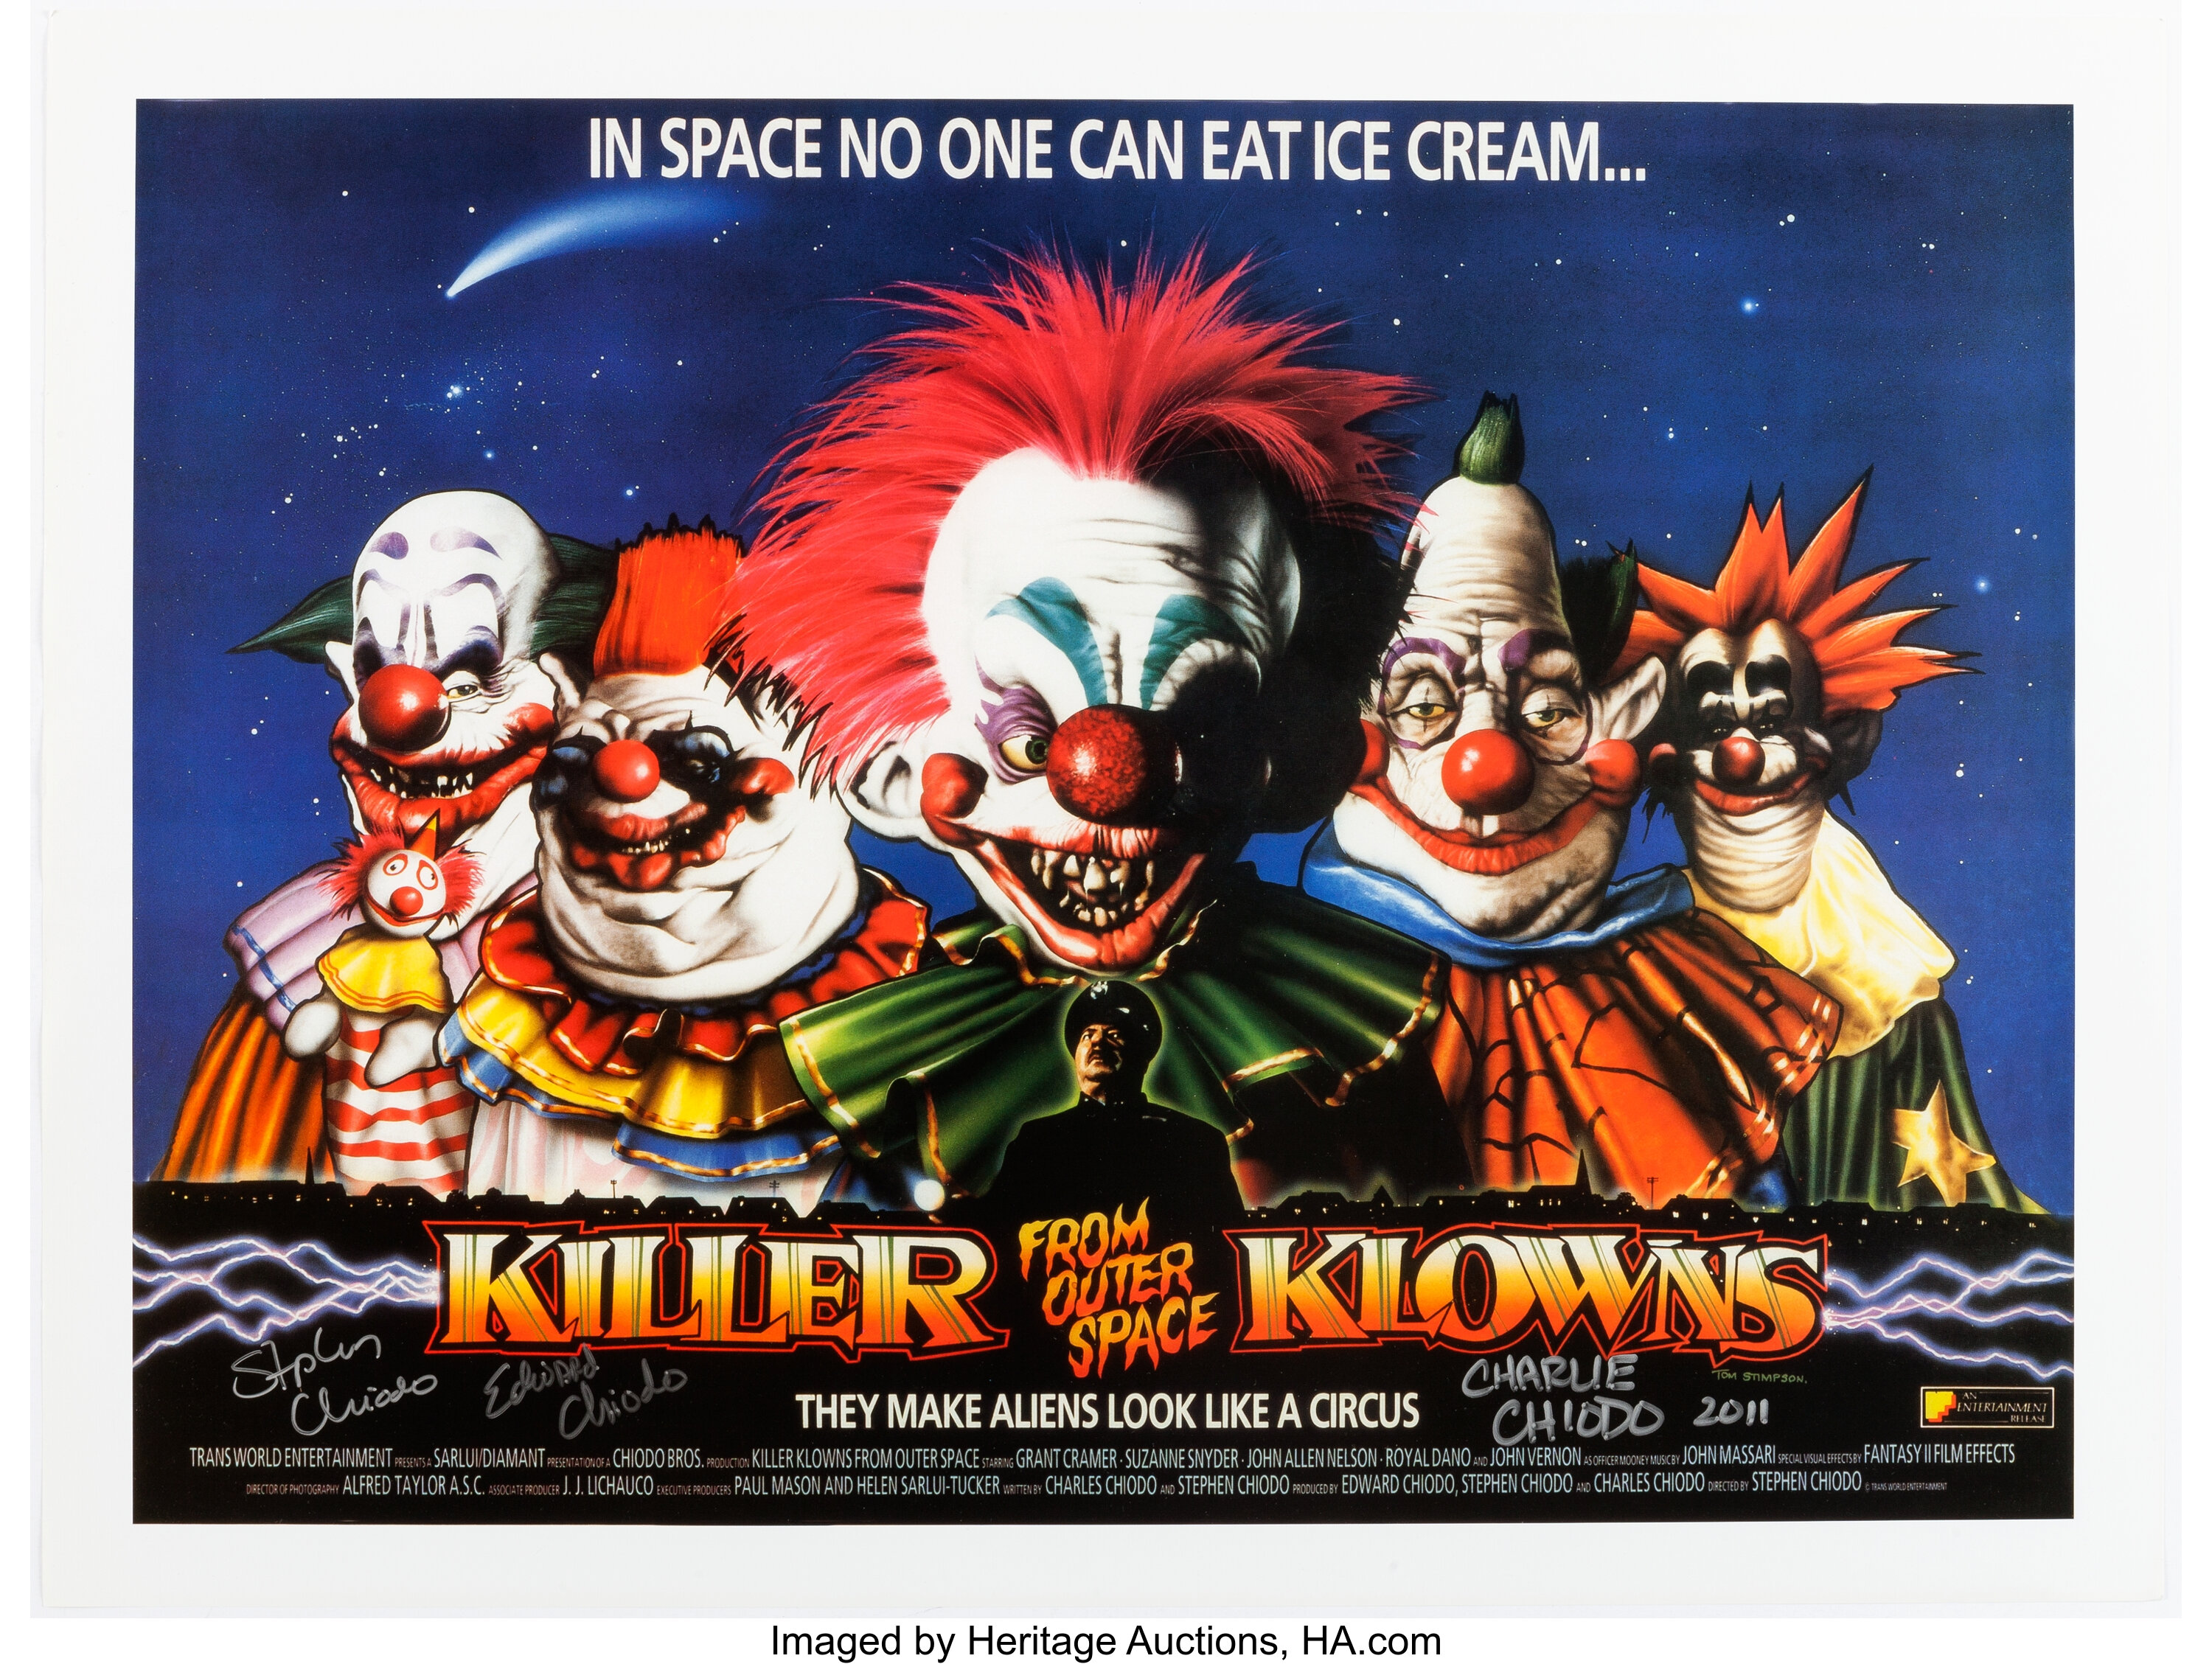 Killer from outer space. Клоуны-убийцы из космоса 1988. Killer Klowns from Outer Space 1988.